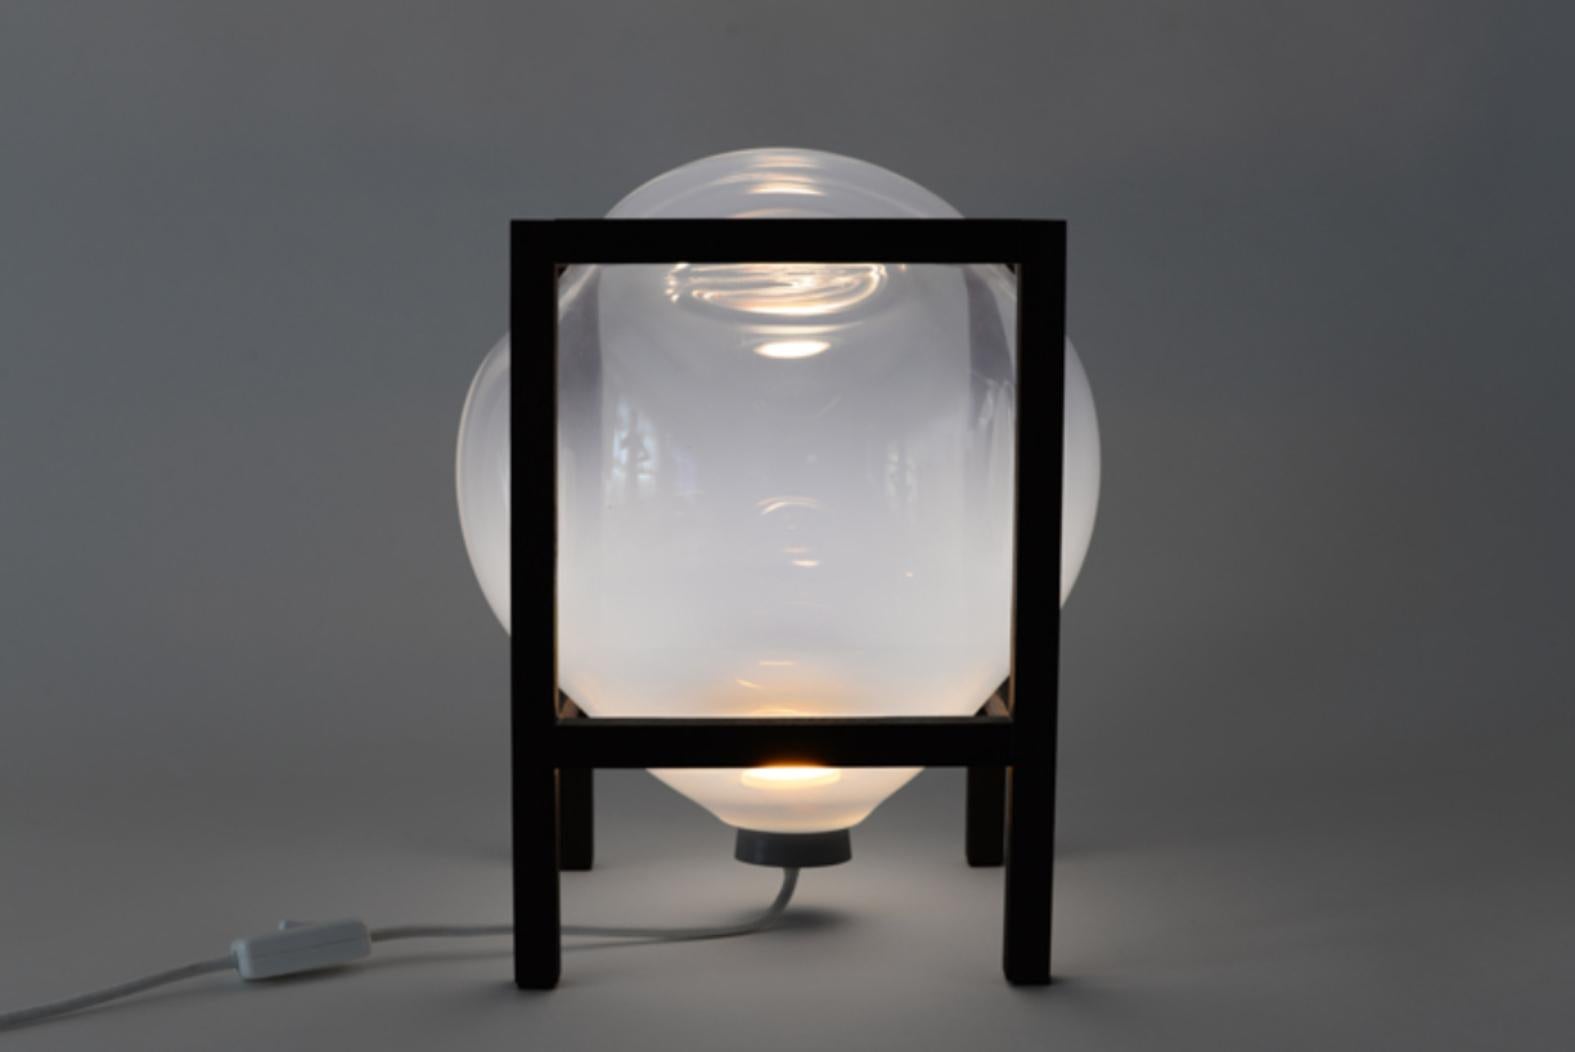 Set of 2 round square white balloon table light by Studio Thier & van Daalen
Dimensions: W 24 x D 24 x H 38 cm
Materials: Wood, Glass

When blowing soap bubbles in the air Iris & Ruben had the dream to capture these temporary beauties in a